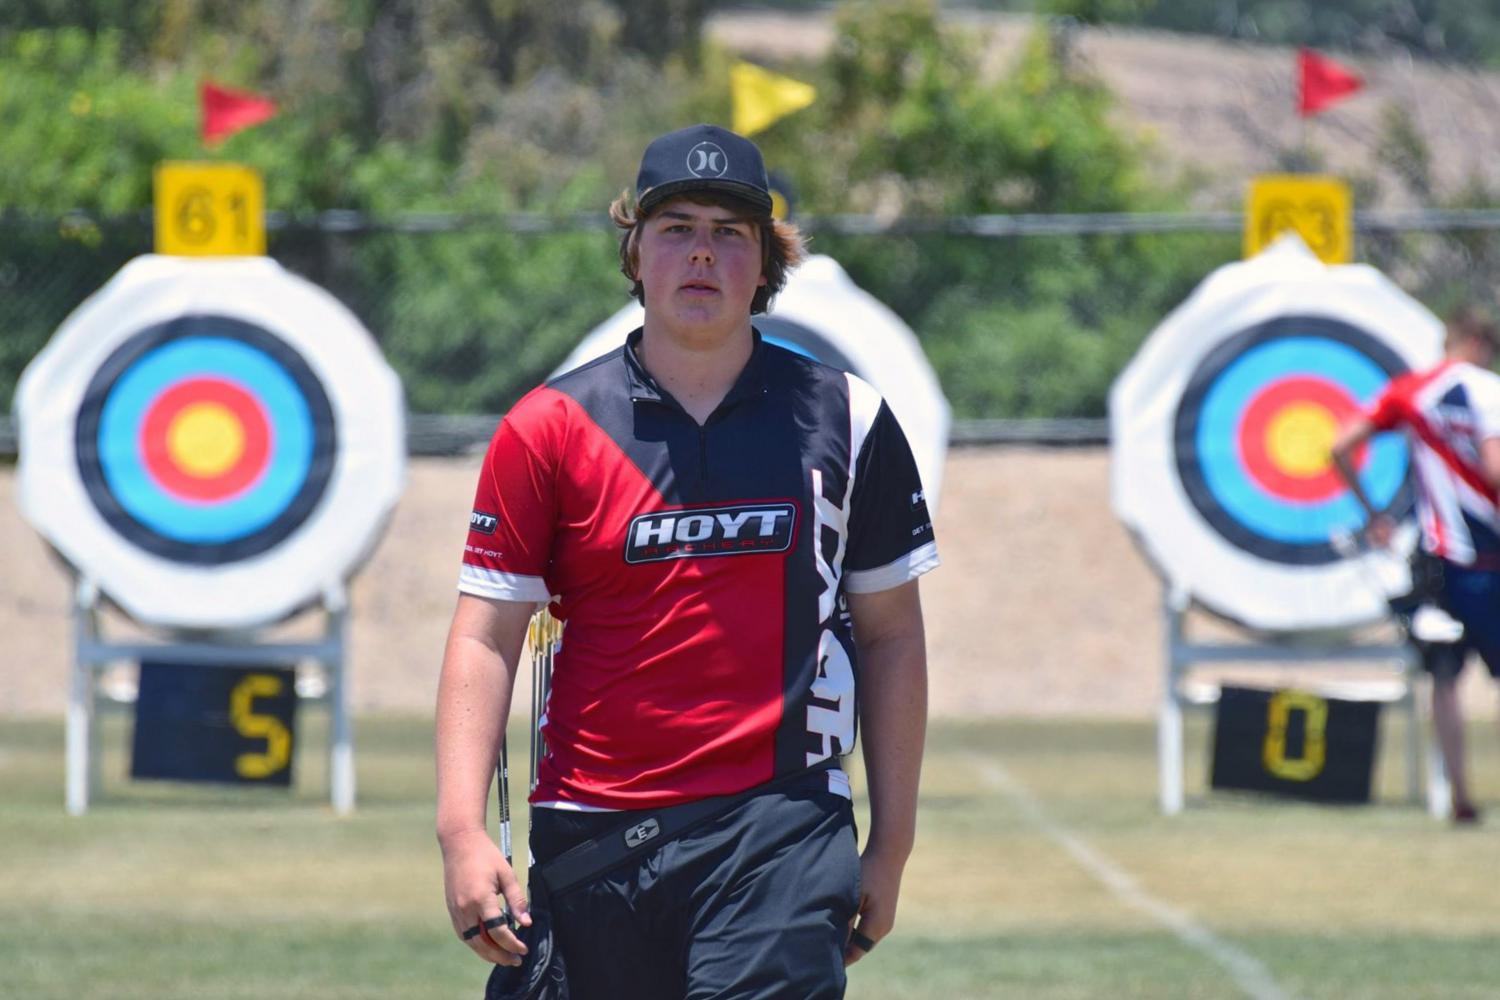 Olympic hopeful Jack Williams steadies his hands for a precise shot at the archery range, hoping to advance his archery career. 